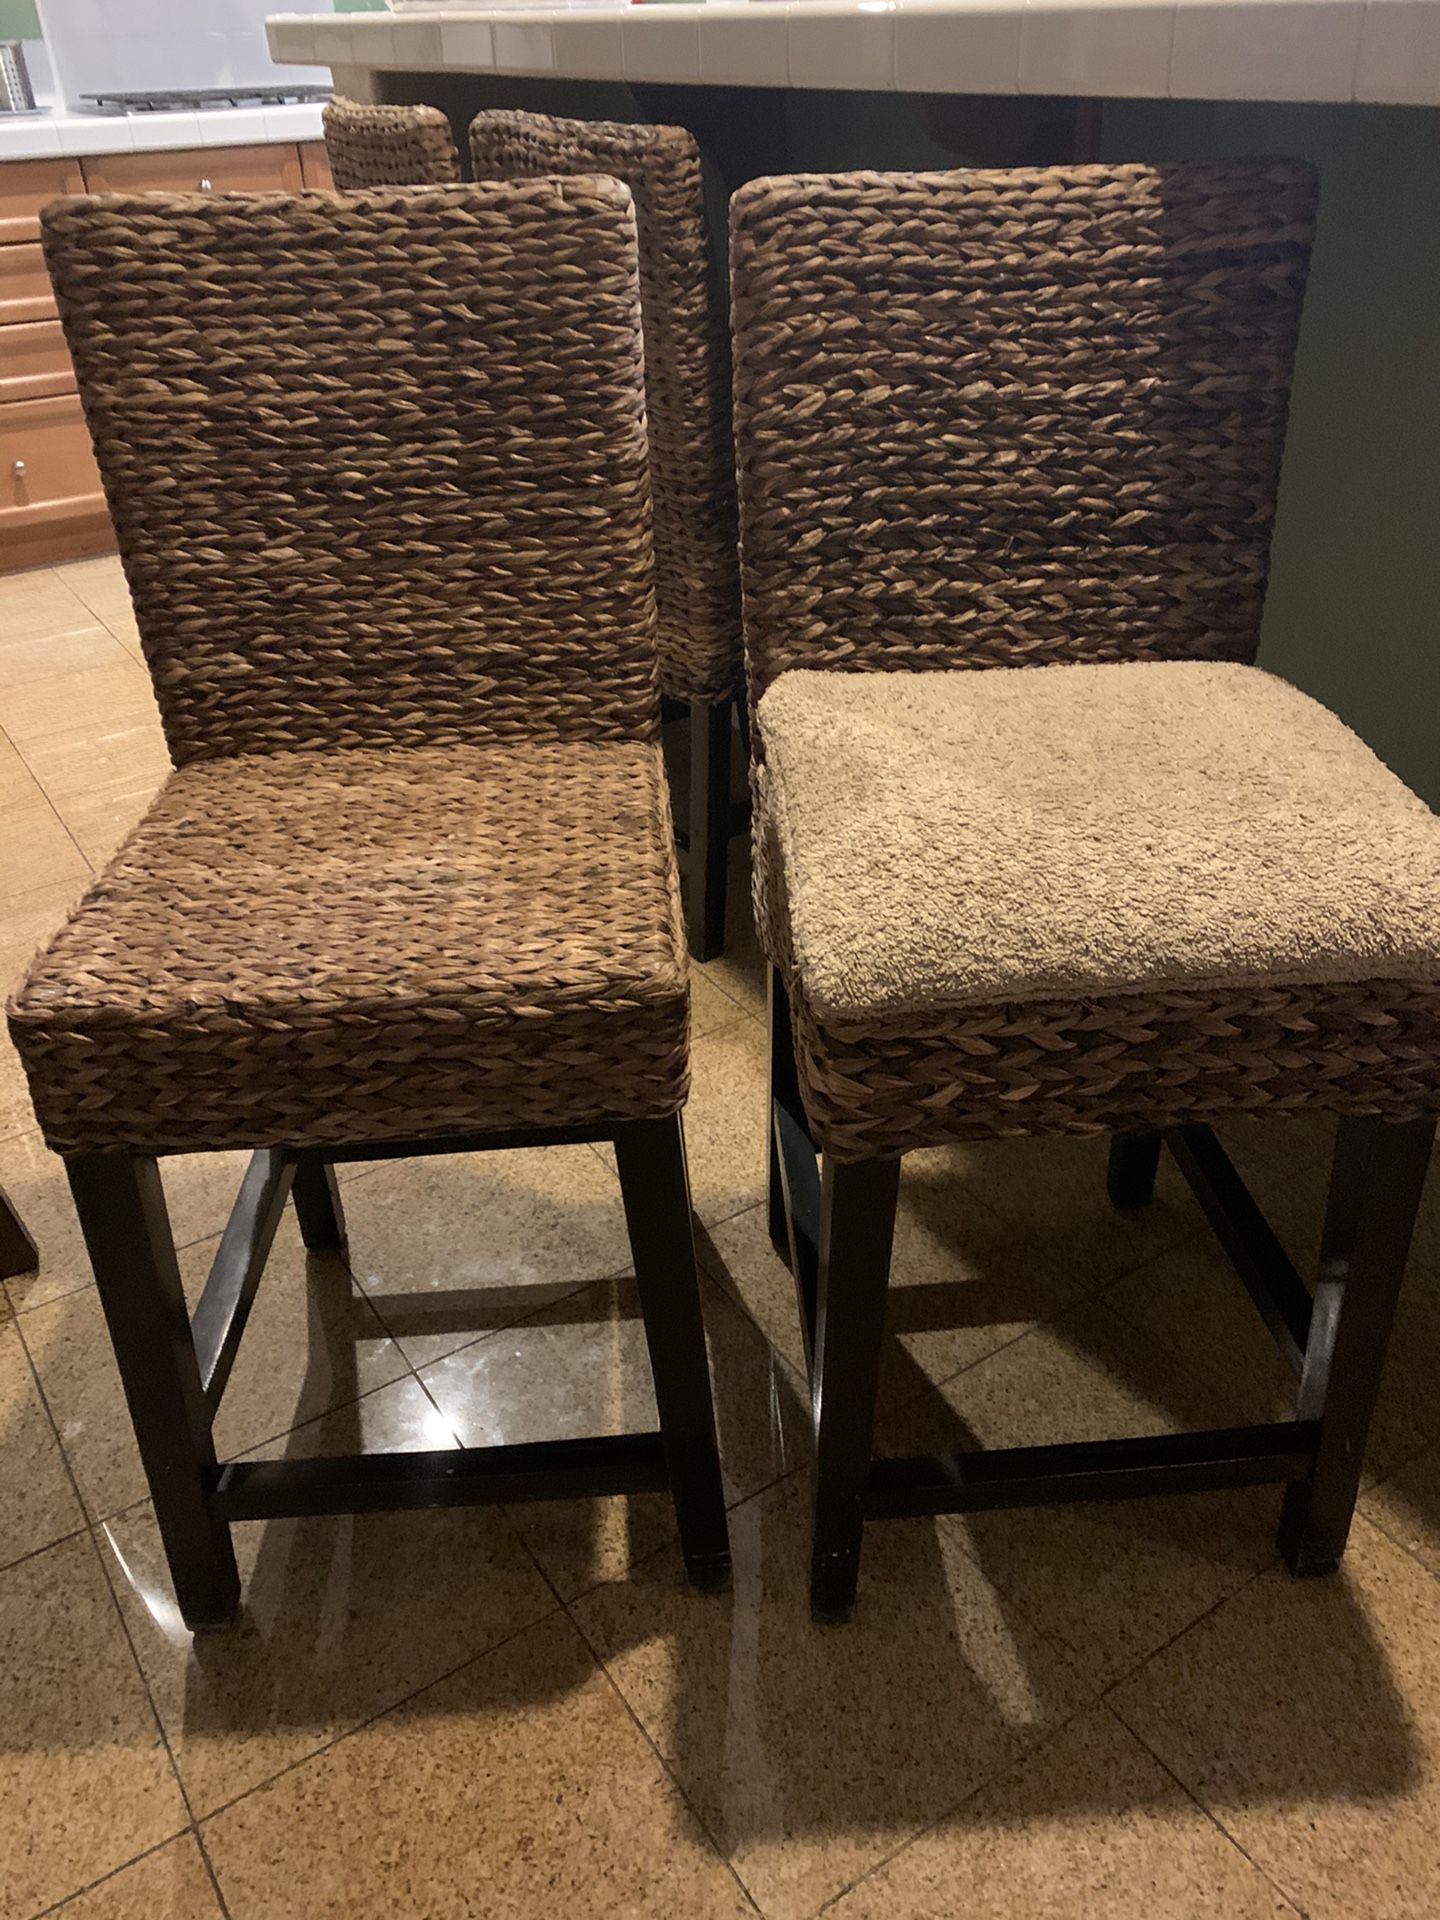 MUST GO! Set of 4 chairs